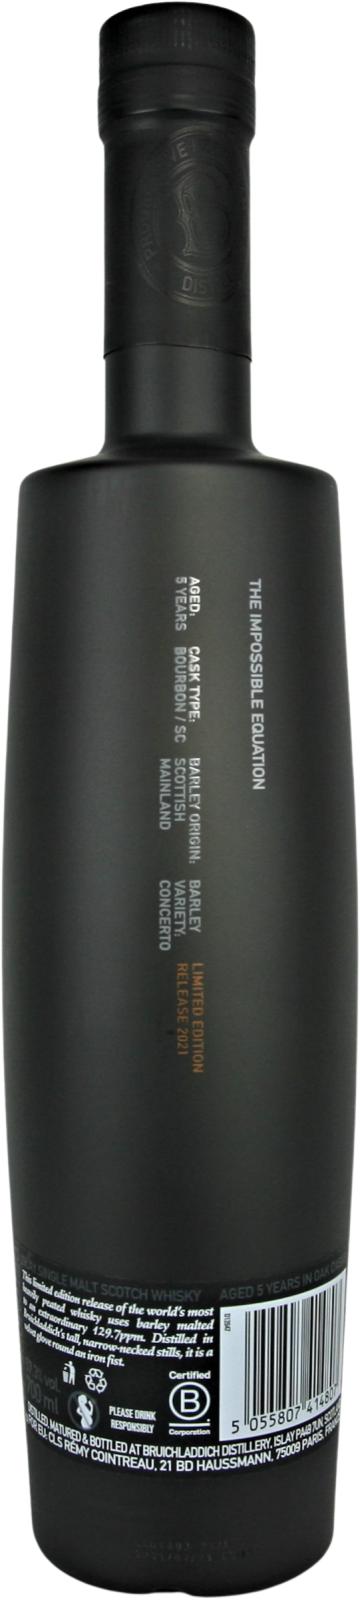 Octomore Edition 12.2 The Impossible Equation / 129.7 PPM